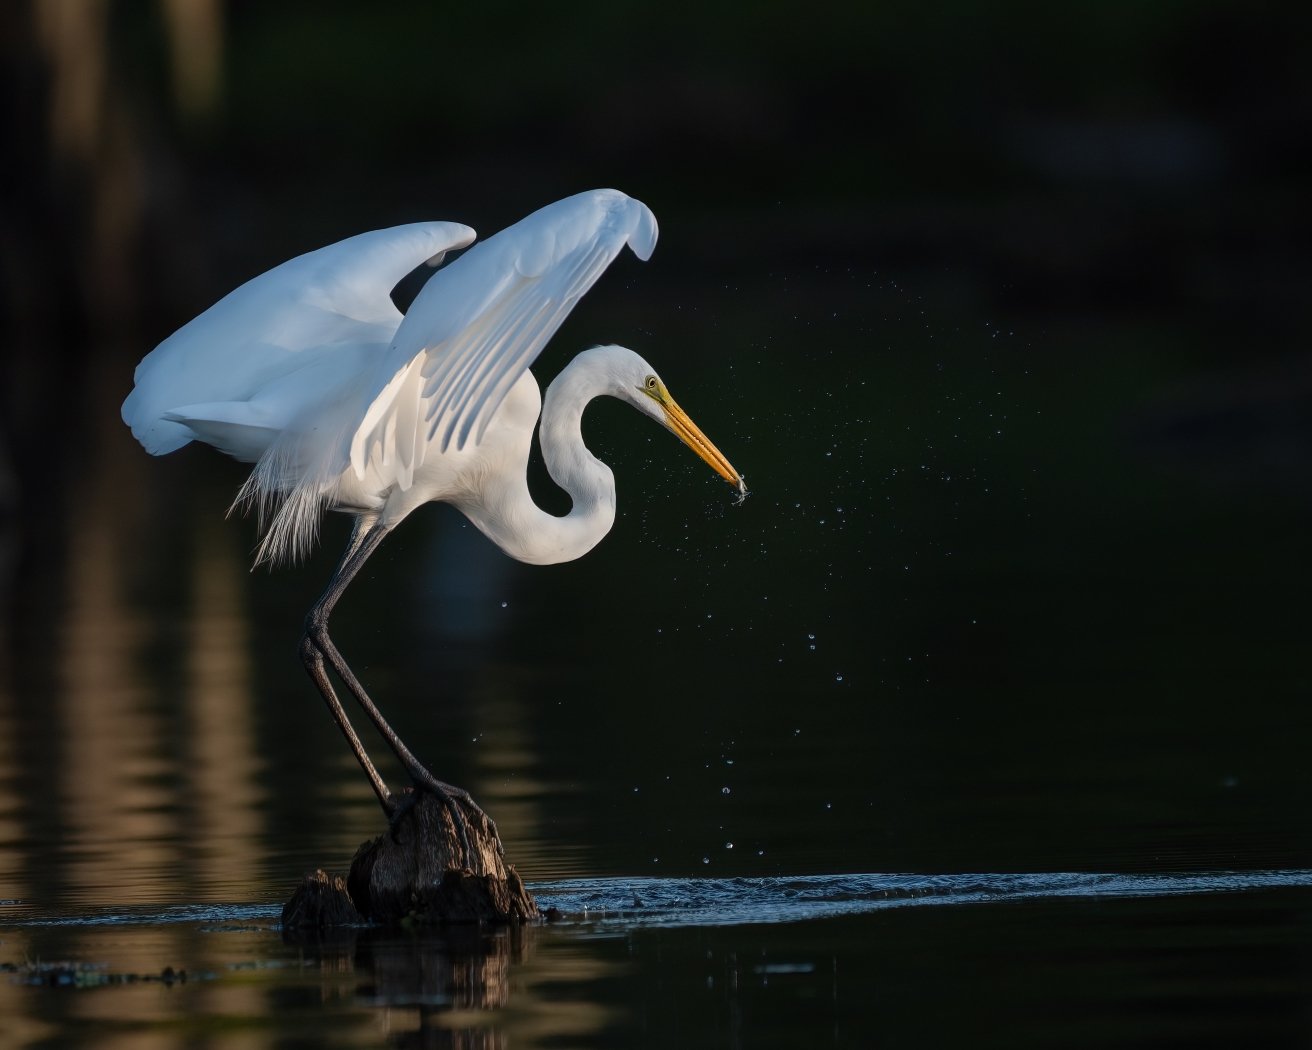 Early Morning Fishing, Tammie Simon, Lafayette Photographic Society, 3rd Place